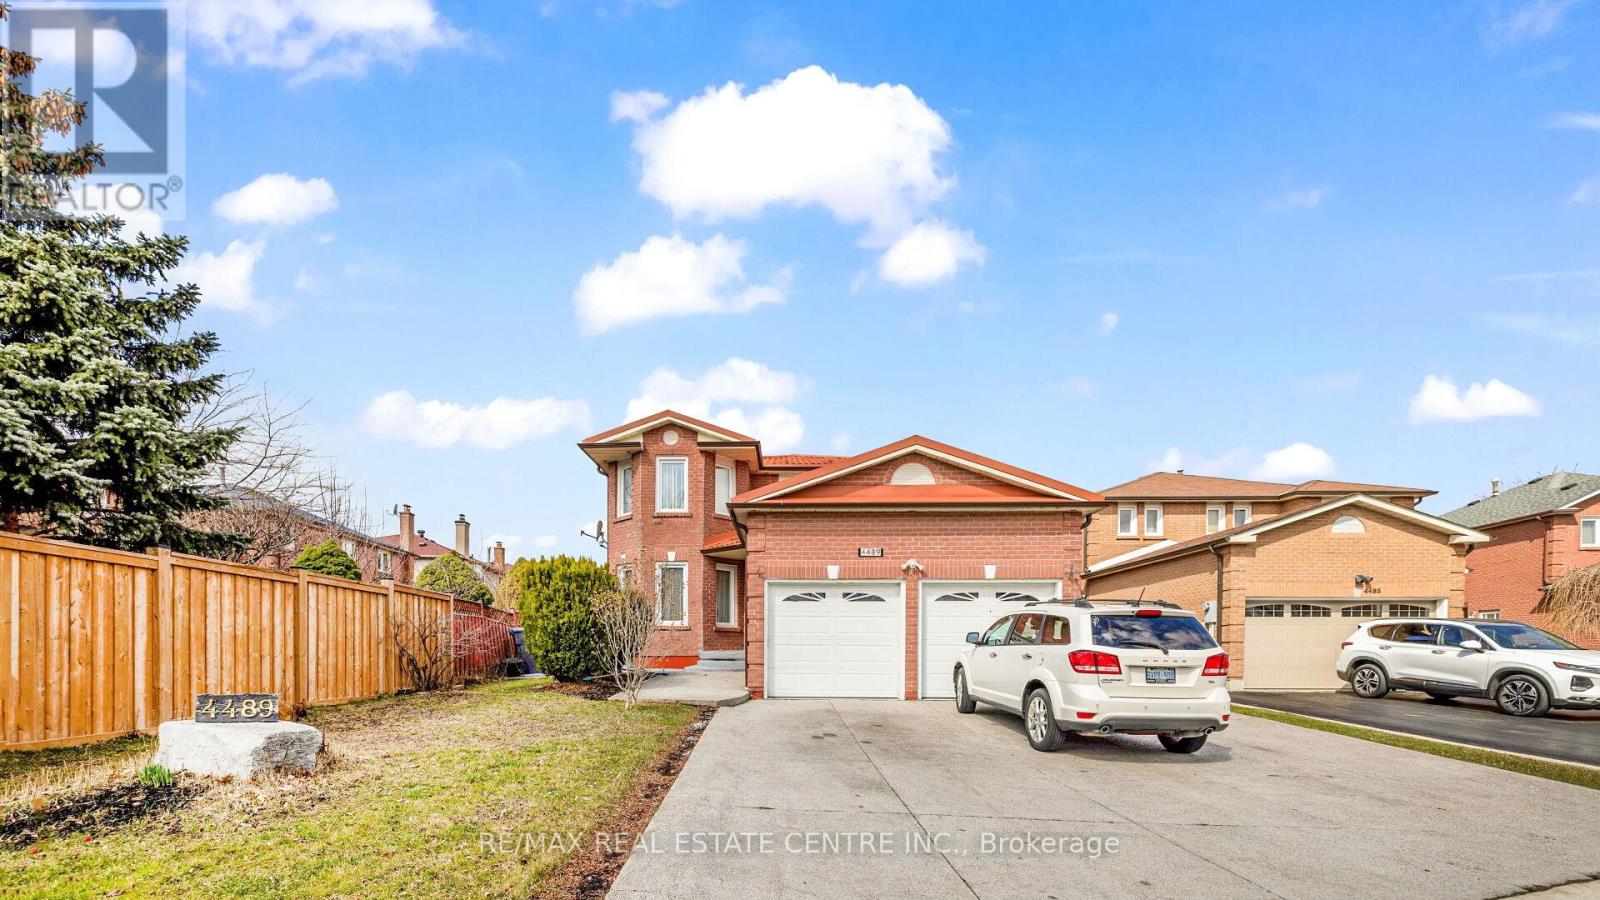 4489 Weymouth Commons Crescent, Mississauga, 6 Bedrooms Bedrooms, ,4 BathroomsBathrooms,Single Family,For Sale,Weymouth Commons,W8147494